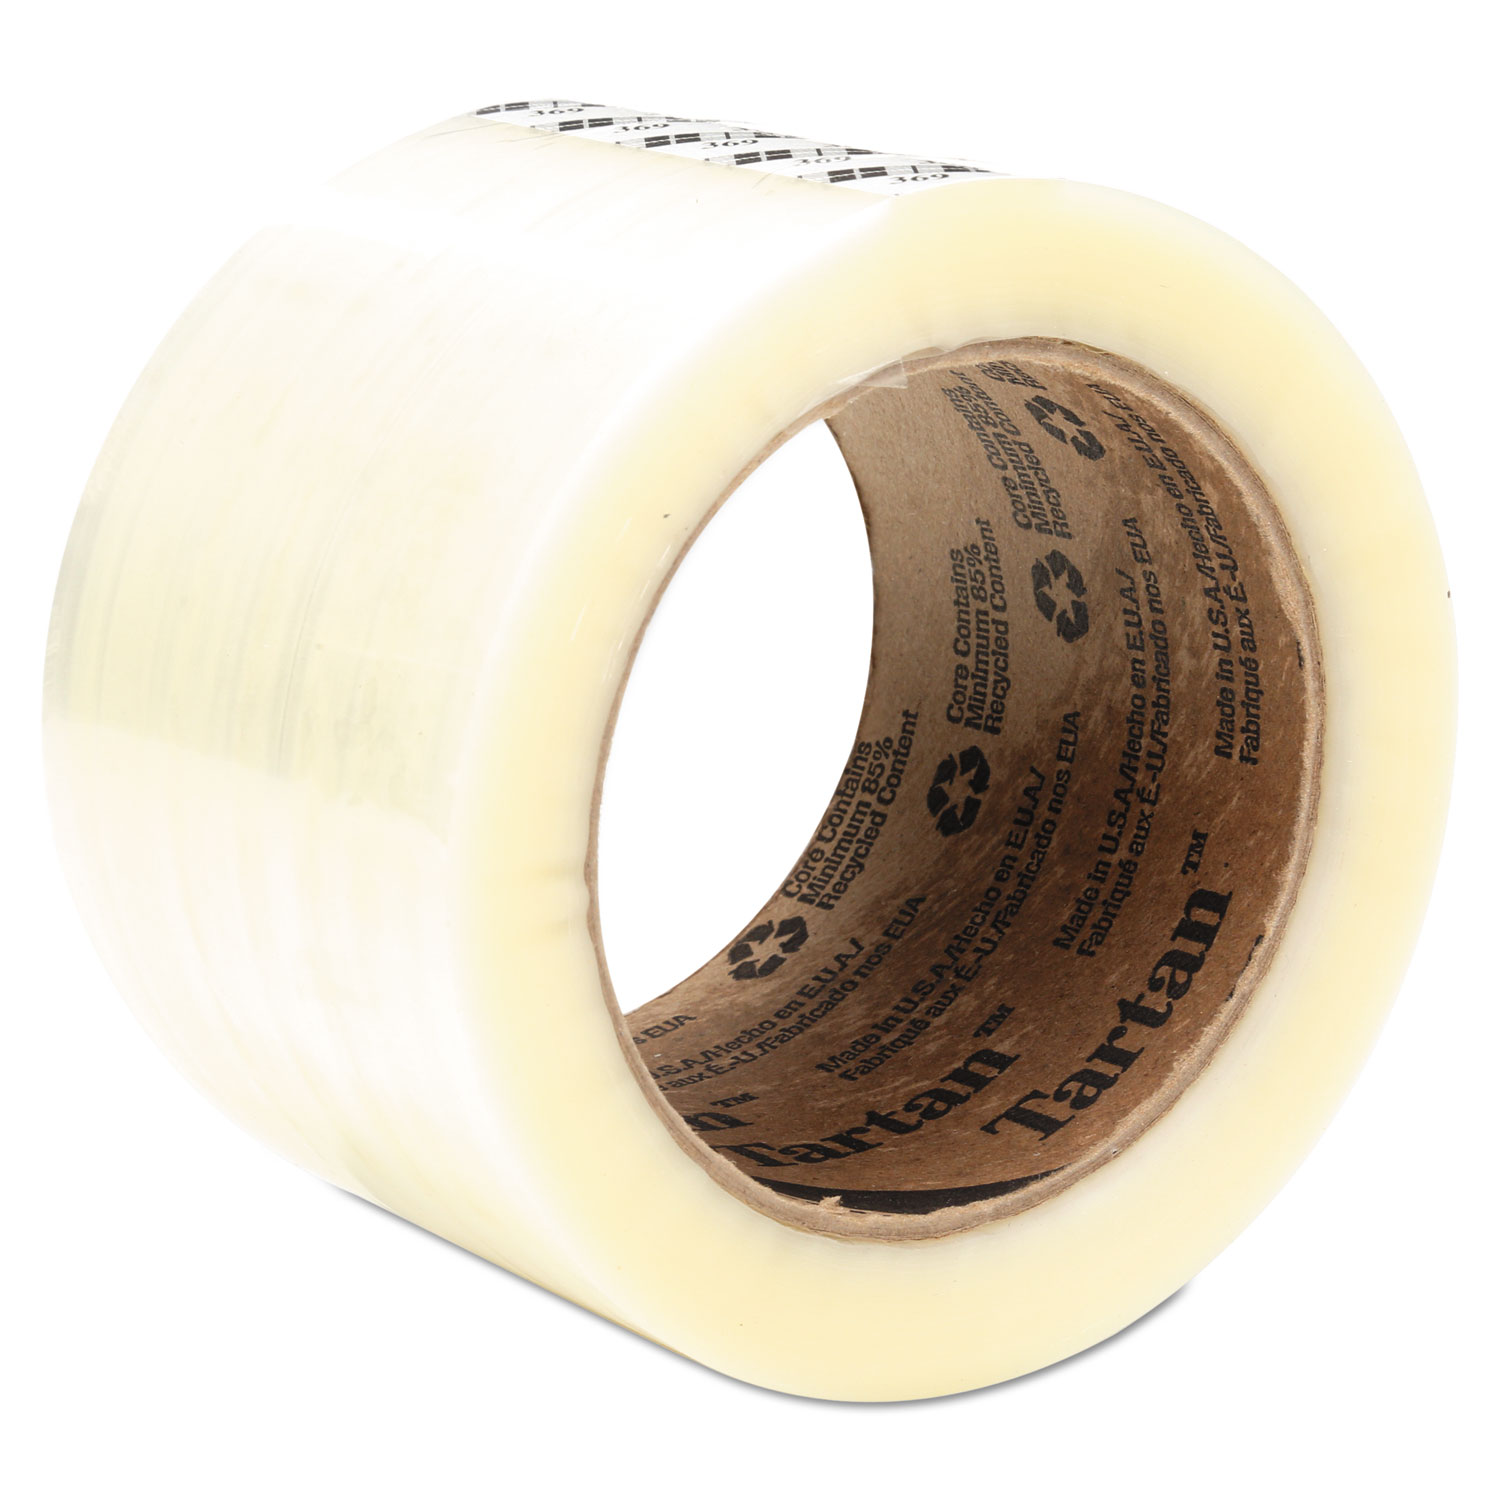 369 Packaging Tape, 72 mm x 100 m, 3